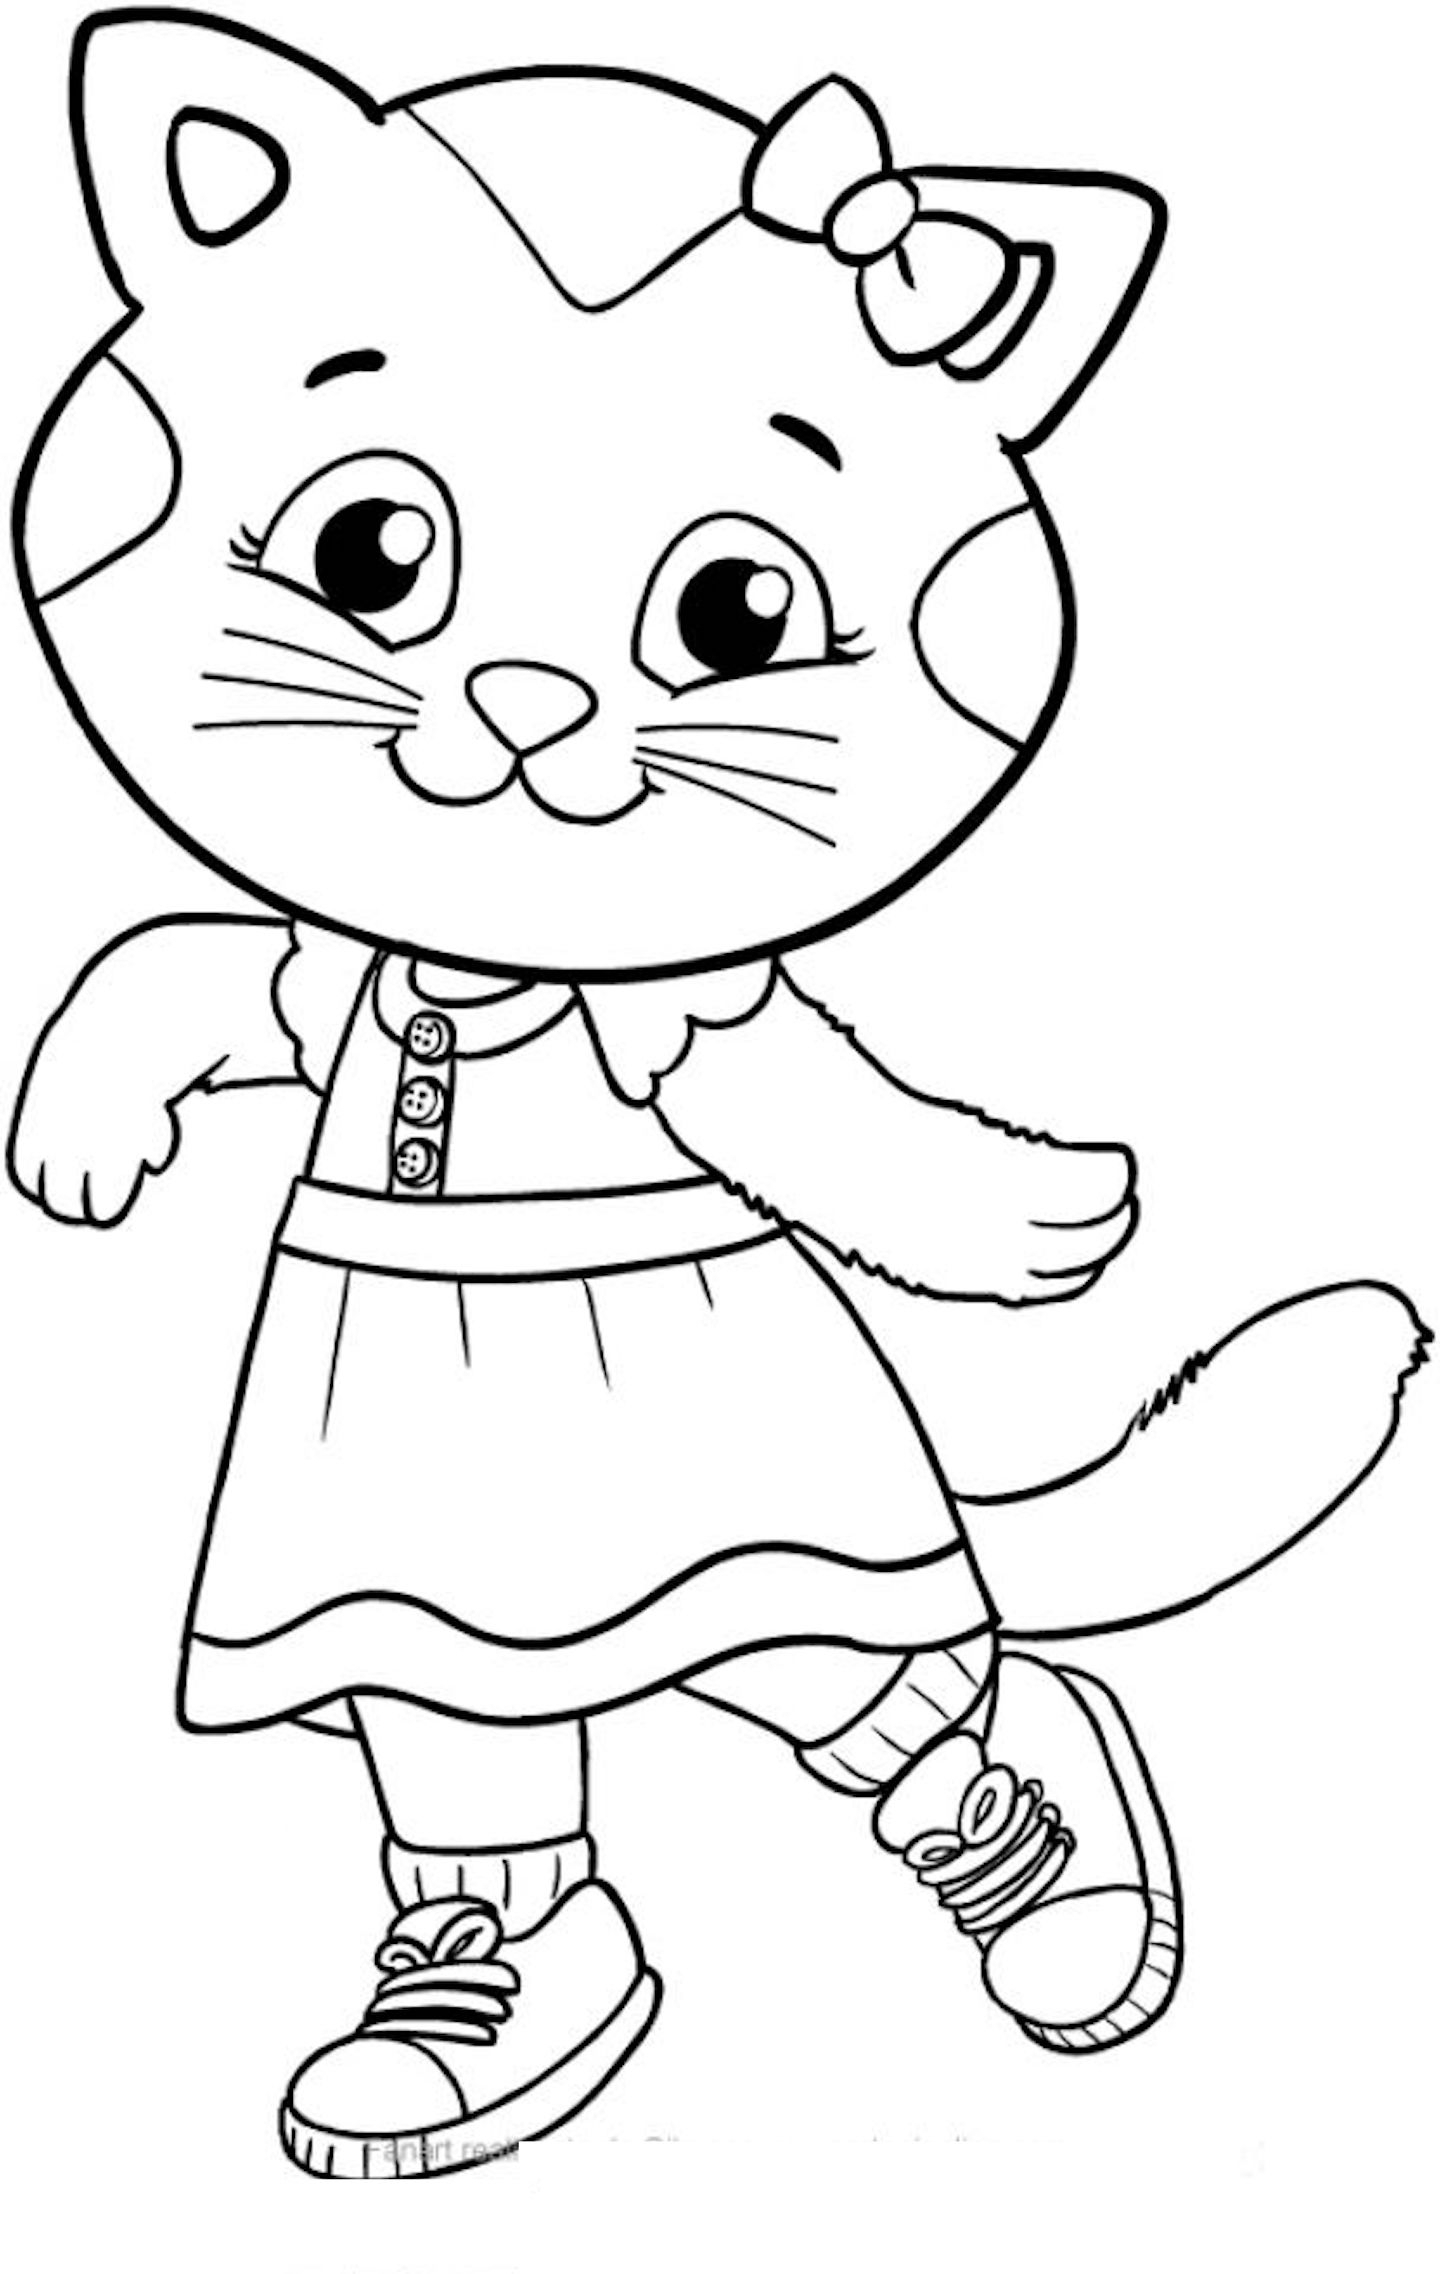 Coloring book wonderful cat lily